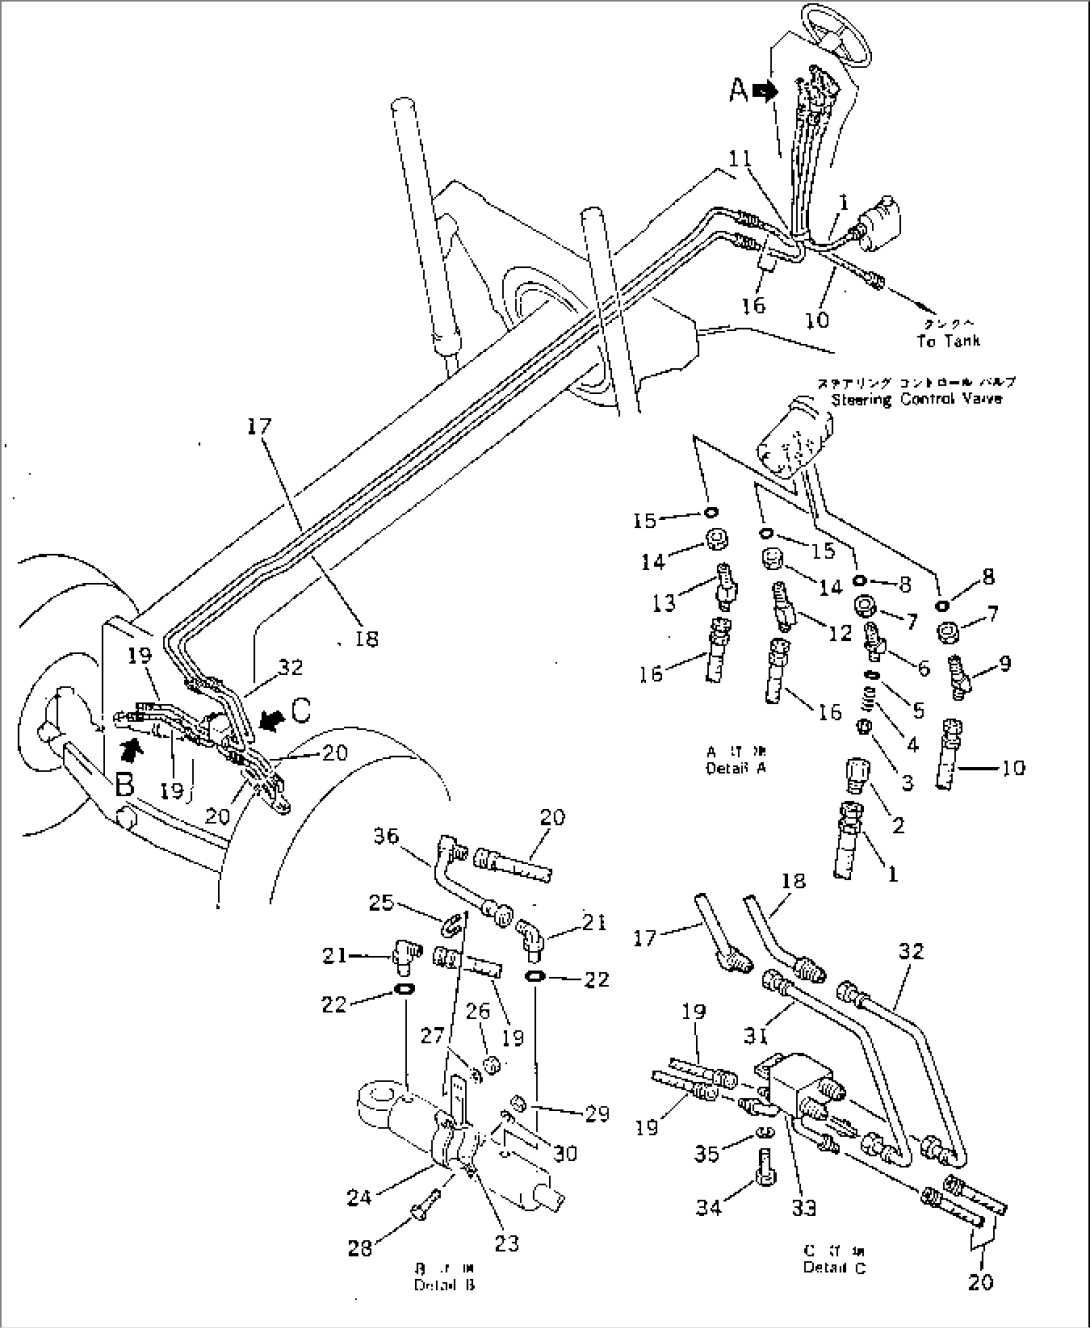 STEERING PIPING (1/2)(#50017-50028)